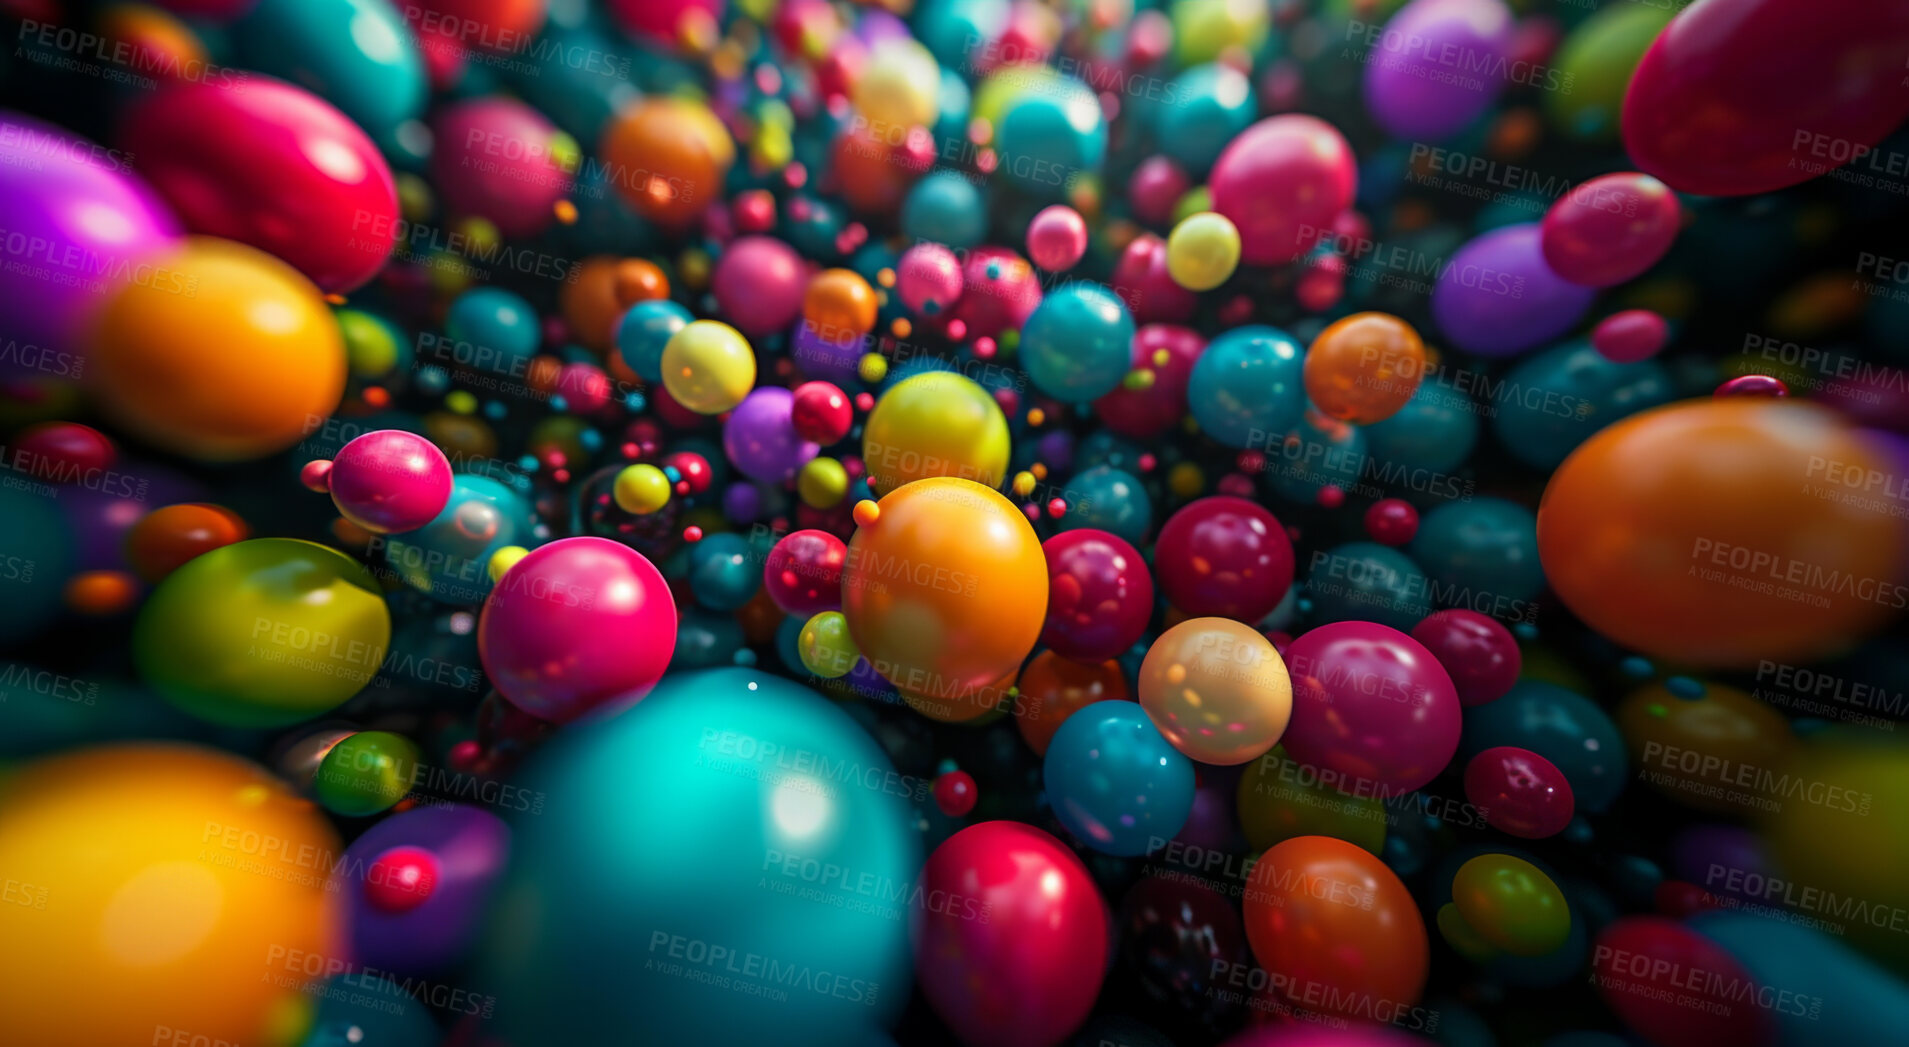 Buy stock photo Spheres, balls or balloons floating on studio background for celebration, birthday or event. Colourful, vivid and creative 3d rendering of a fantasy mockup for artistic design, wallpaper and graphic